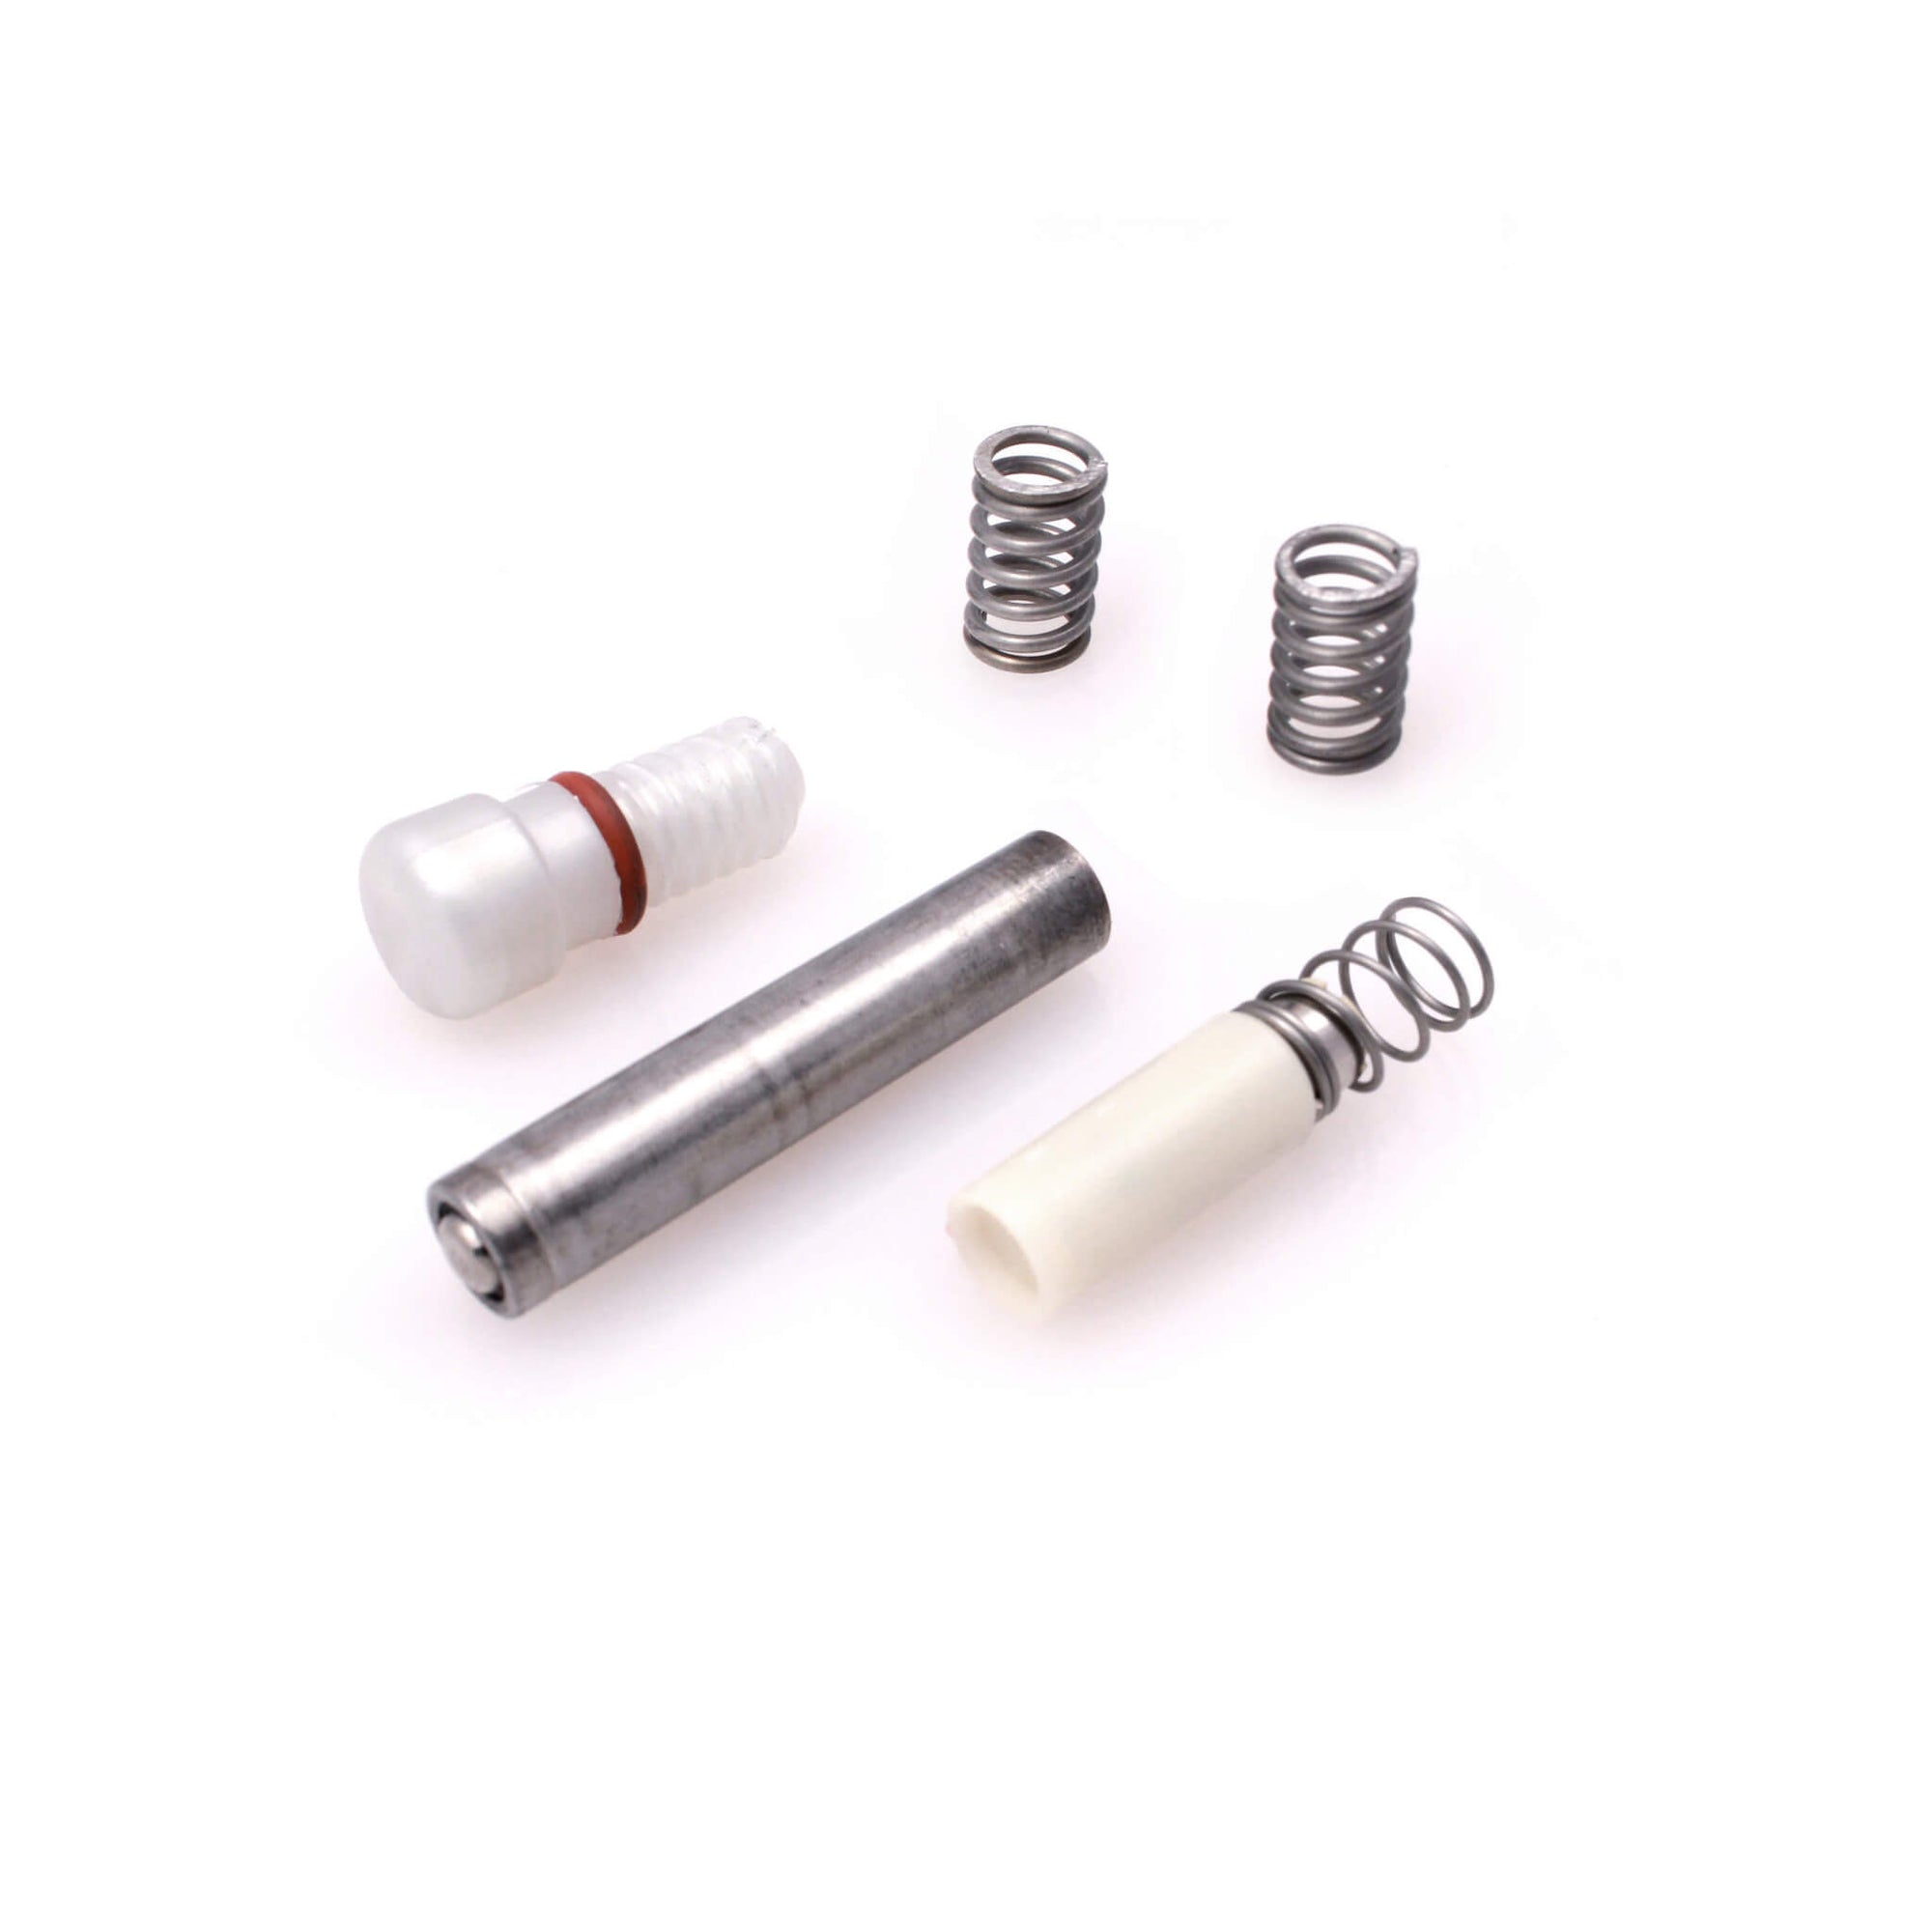 ARK Spare parts kit